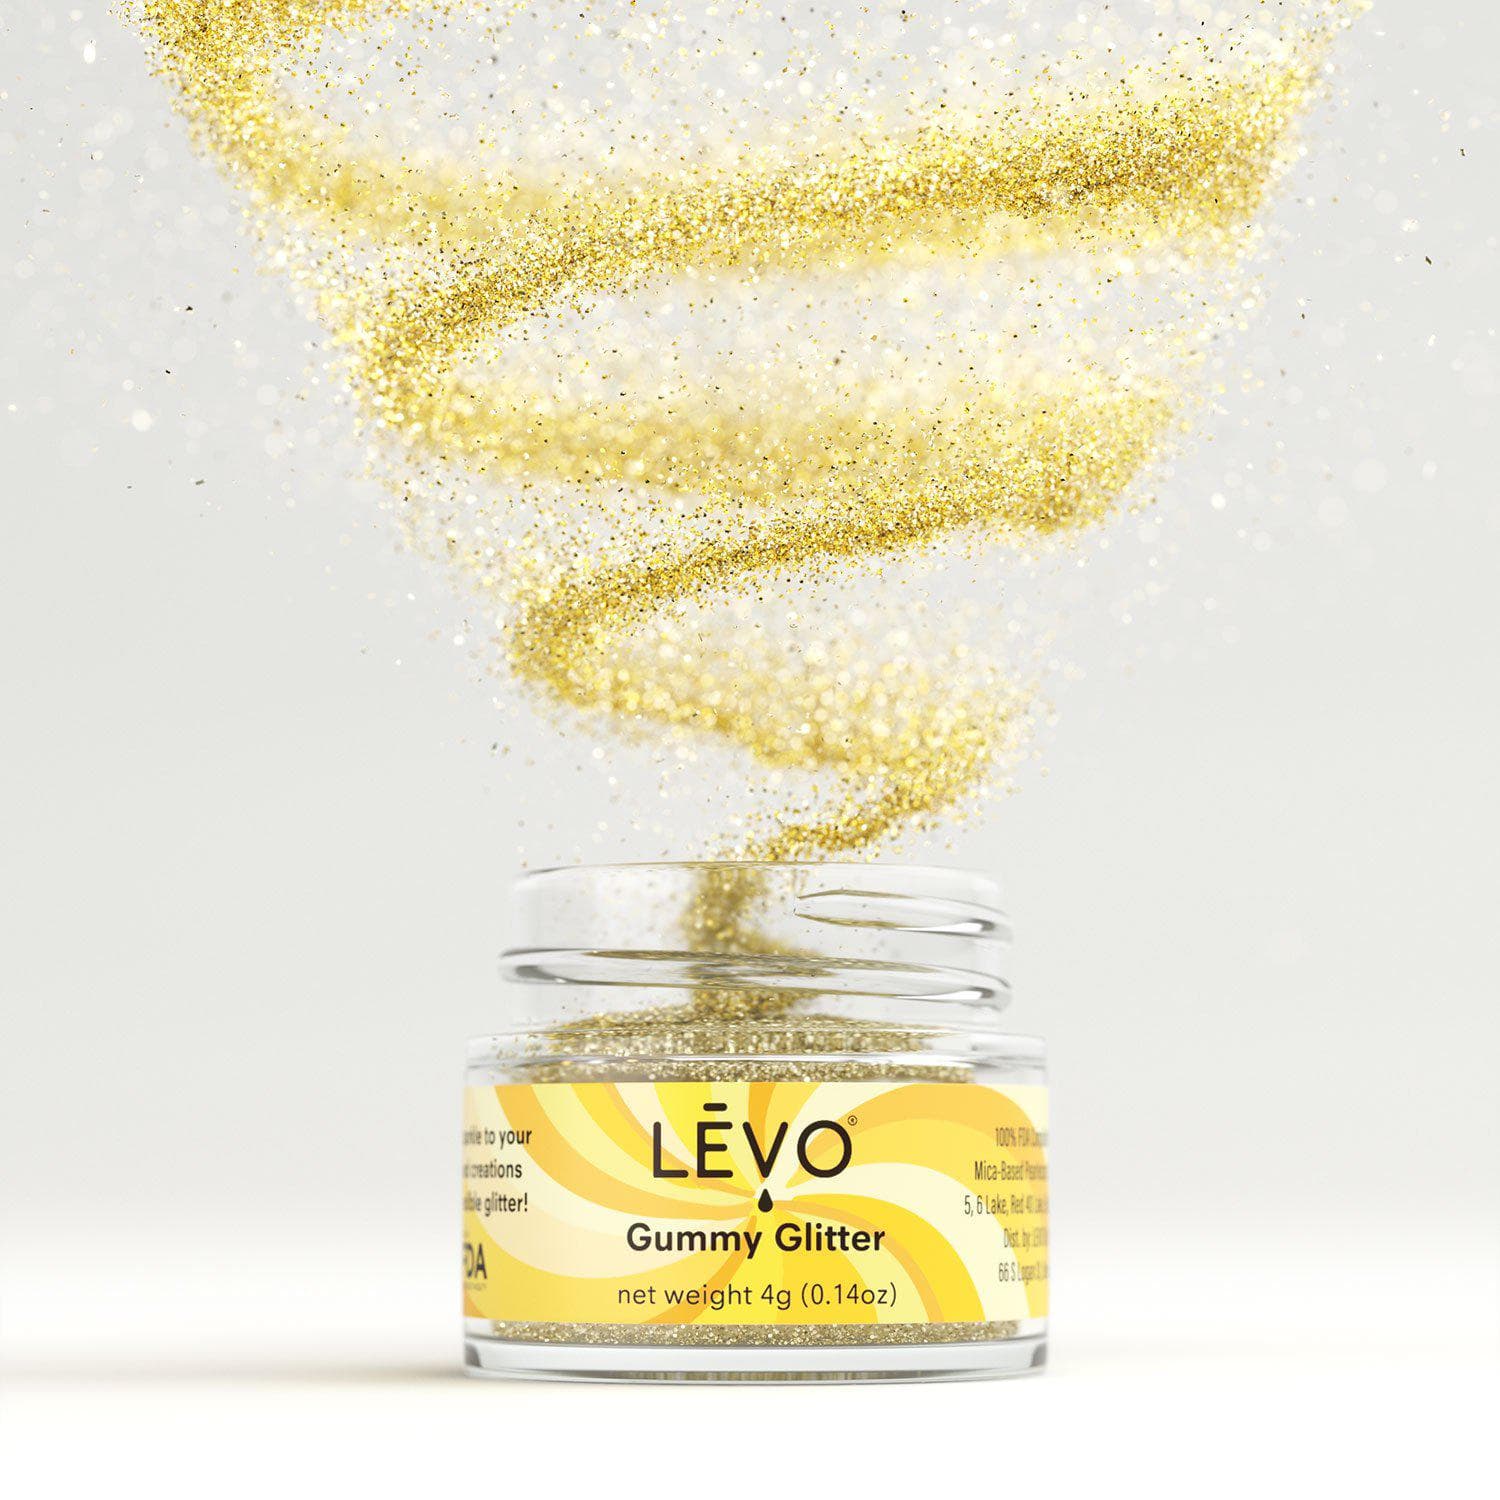 Edible gold glitter and shimmer for your LEVO 2 infused foods.